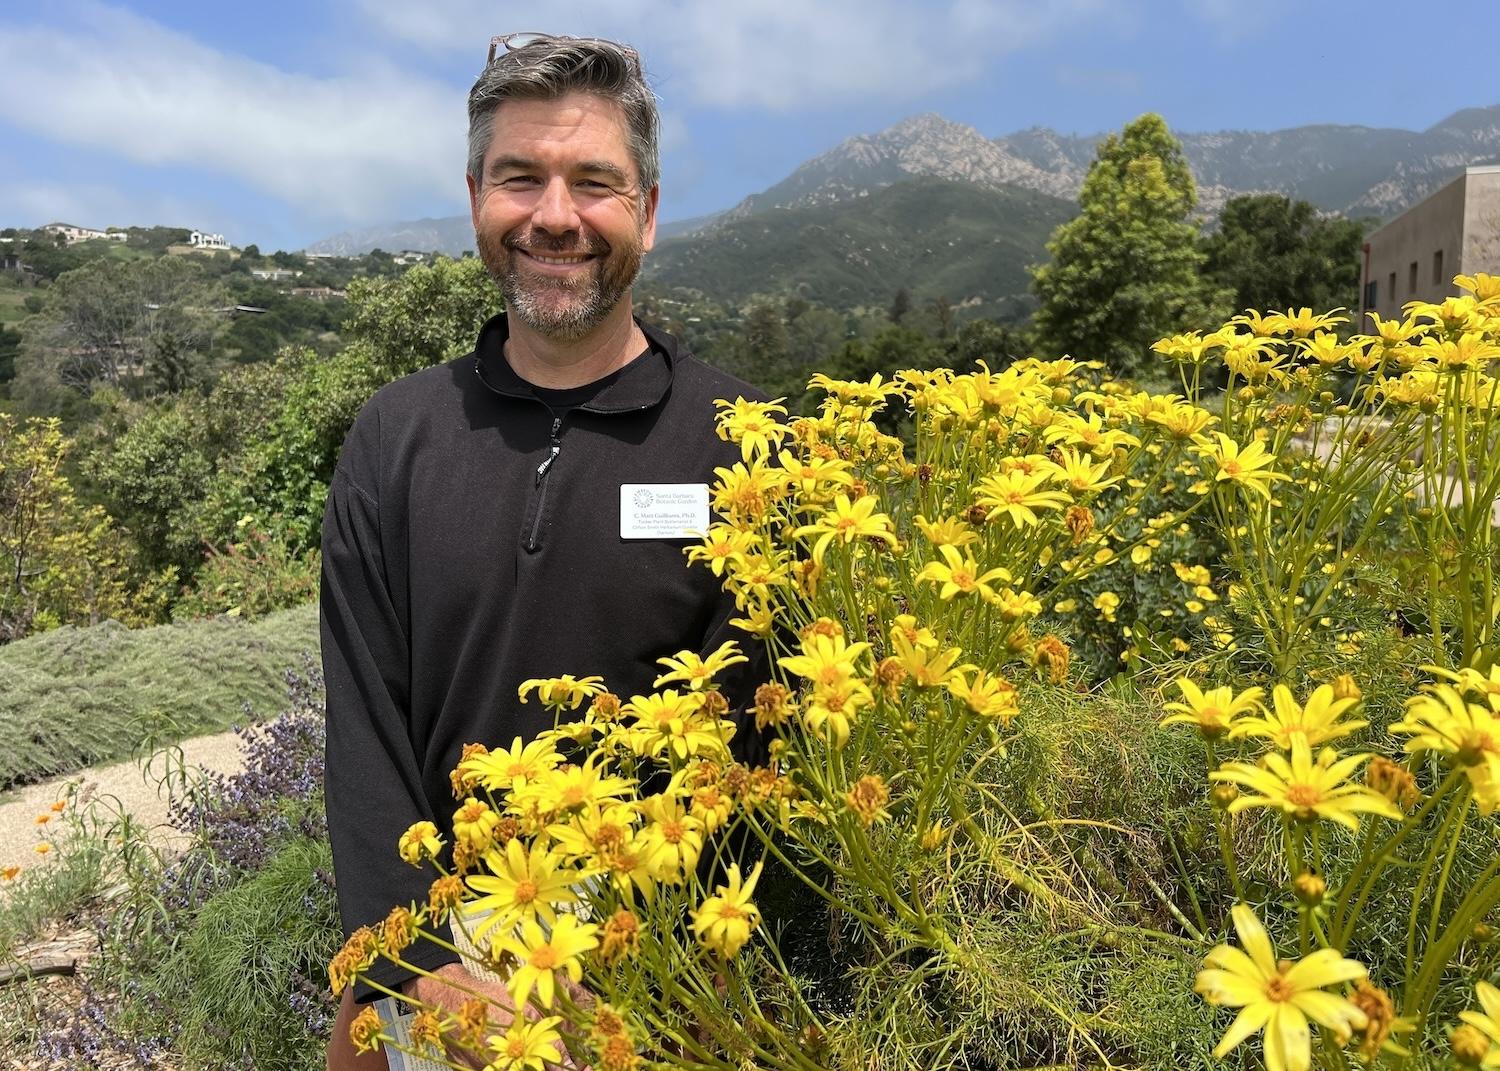 At the Santa Barbara Botanic Garden, botanist/plant systematist Matt Guilliams shows off Giant coreopsis, a popular site on the Channel Islands.